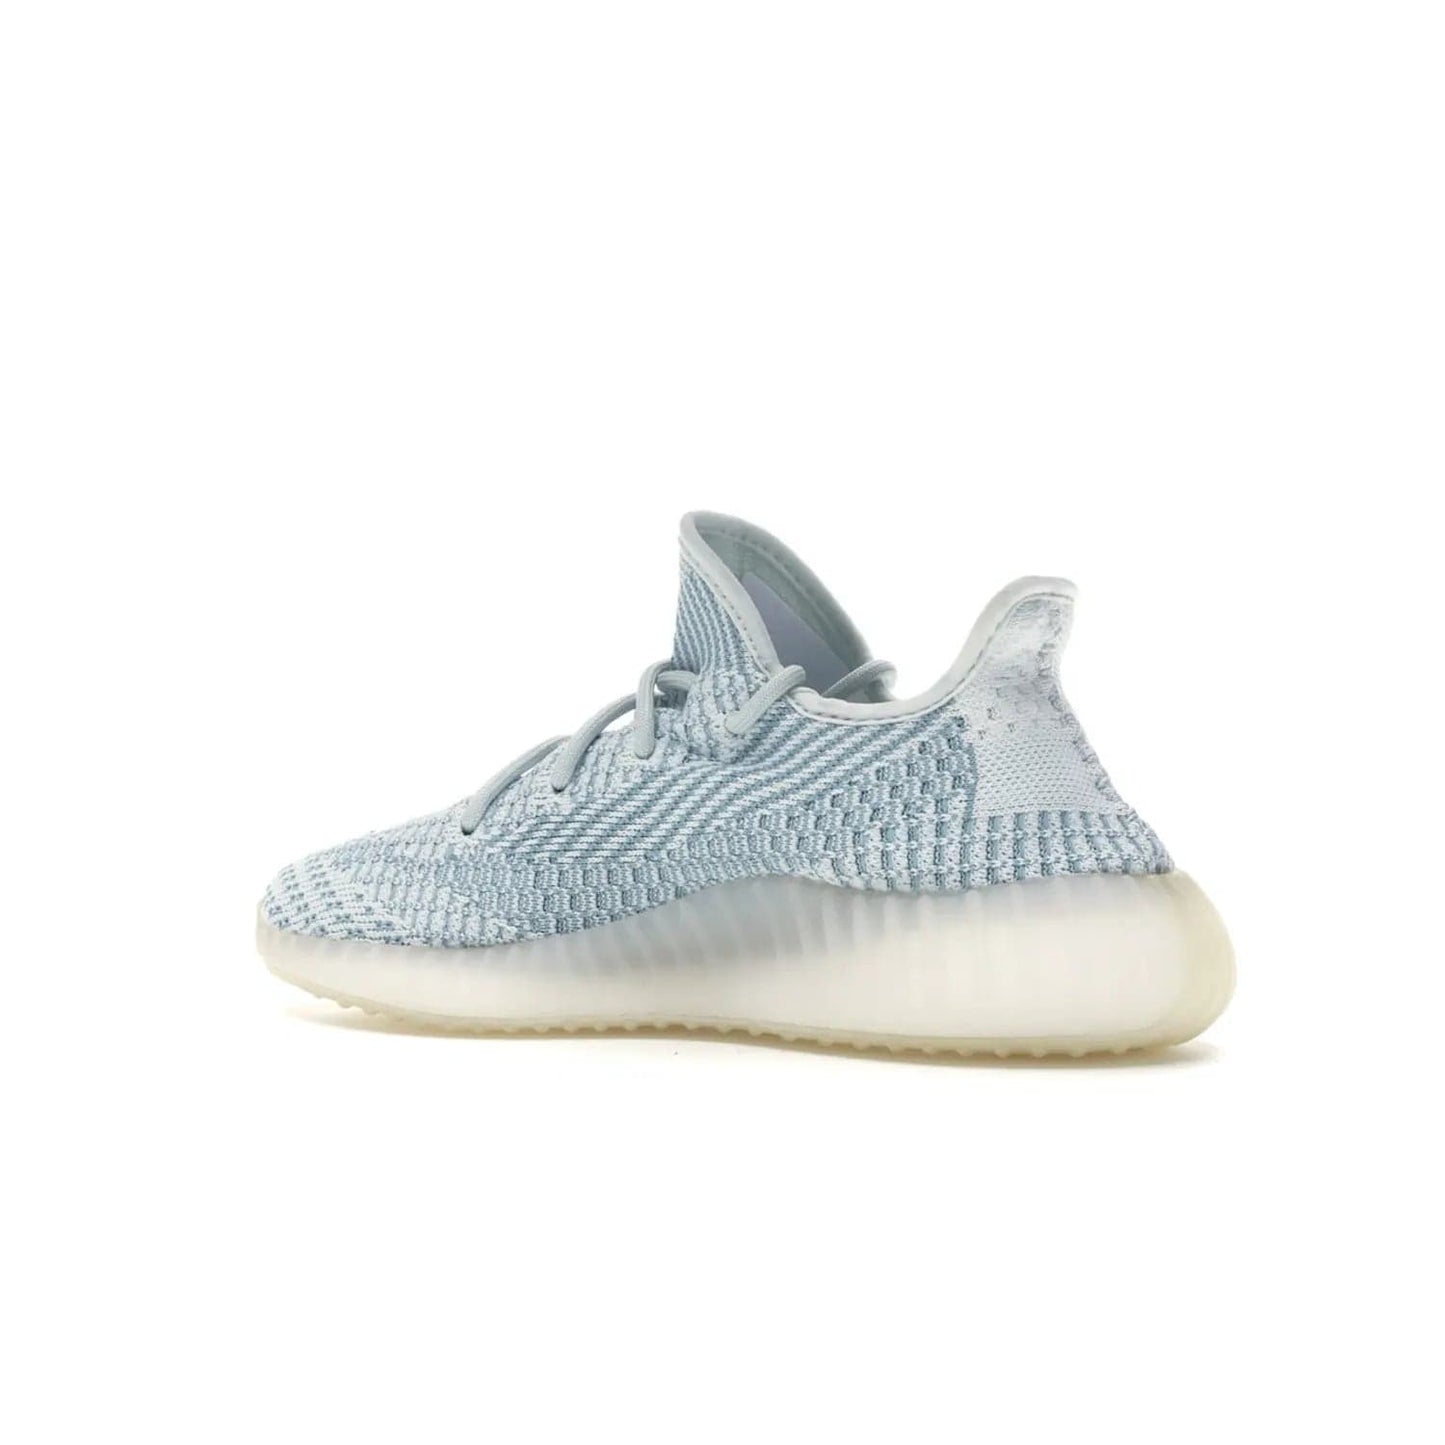 adidas Yeezy Boost 350 V2 Cloud White (Non-Reflective) - Image 22 - Only at www.BallersClubKickz.com - Adidas Yeezy Boost 350 V2 Cloud White (Non-Reflective) features Primeknit fabric and a unique, eye-catching design of cream, bluish-white, and transparent strip. Step out in timeless style with this eye-catching sneaker.